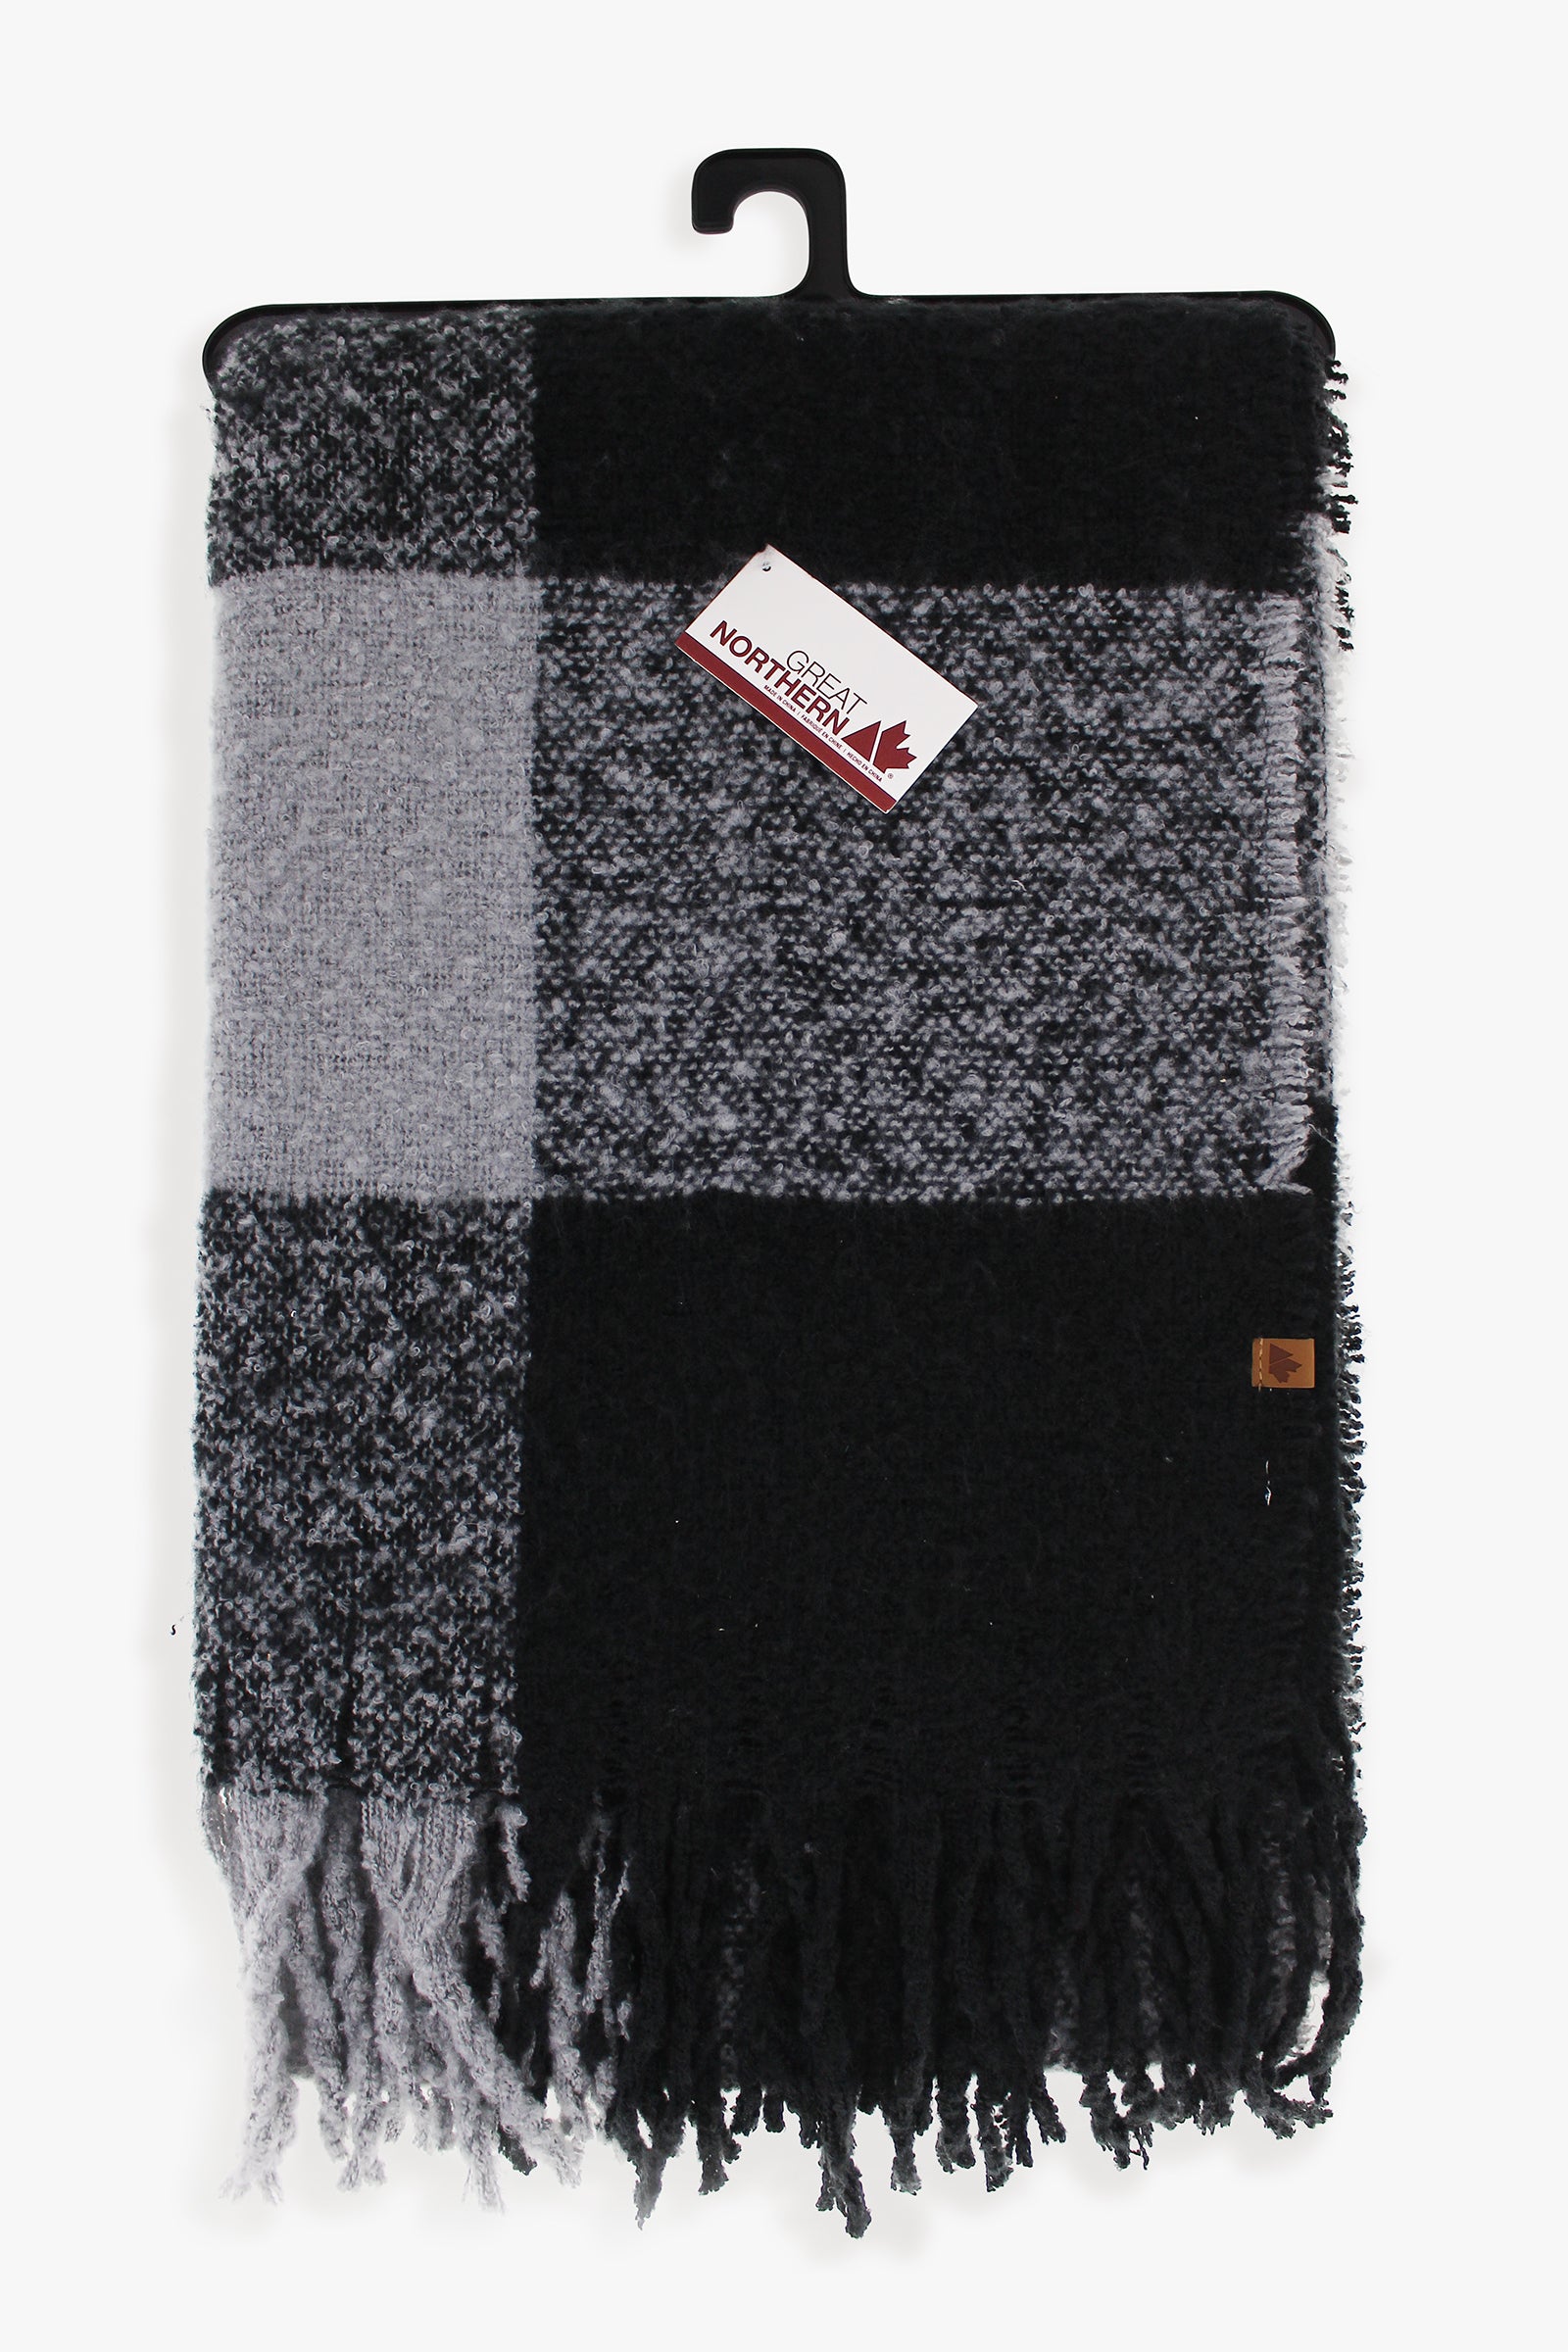 Ladies plaid oversized winter scarf in black and grey